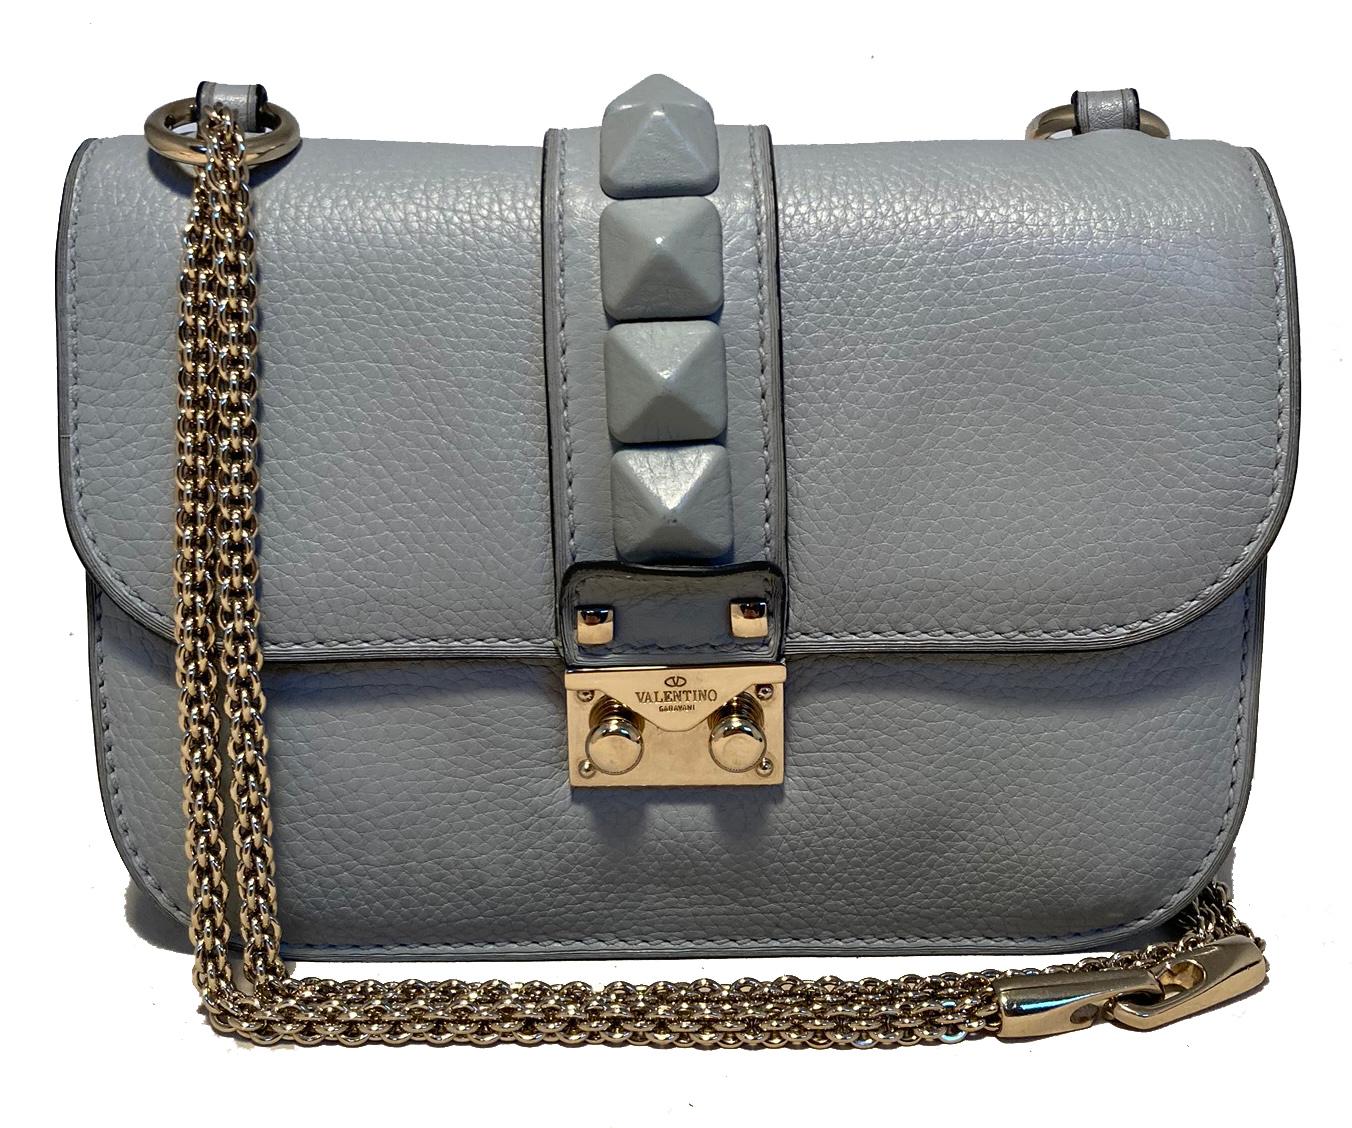 Valentino Vitello Small Glam Lock Rockstud Flap Bag Glamrock shoulder bag in excellent condition. Blue grey pebbled leather exterior trimmed with centered leather studs along top flap, gold hardware, and chain shoulder strap. Front pinch lock top